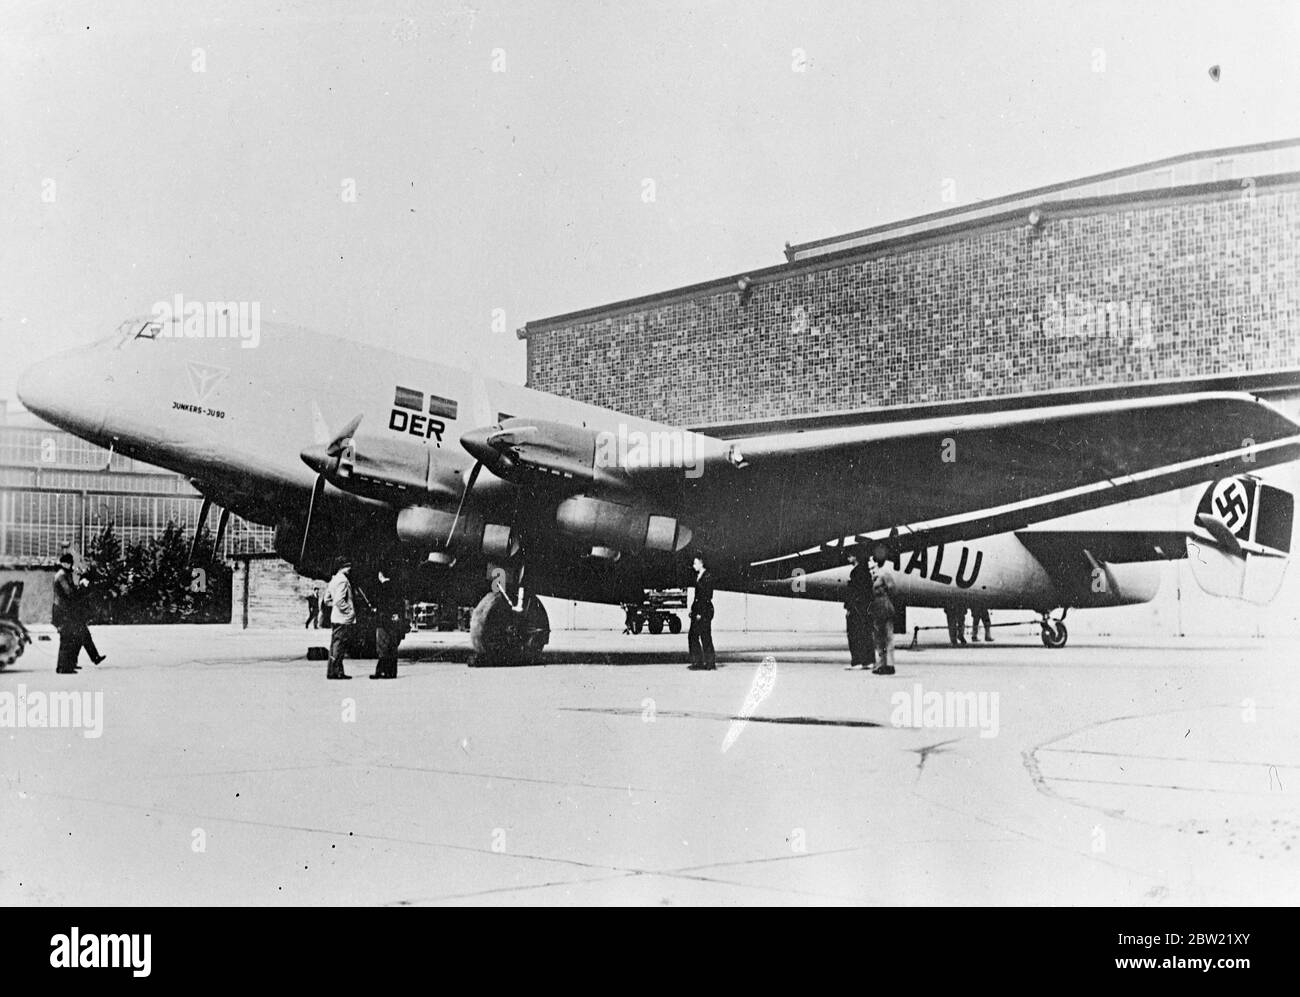 The new Junkers JU 19 airliner. It has been name the Der Grosse Dessauer 23 September 1937 Stock Photo